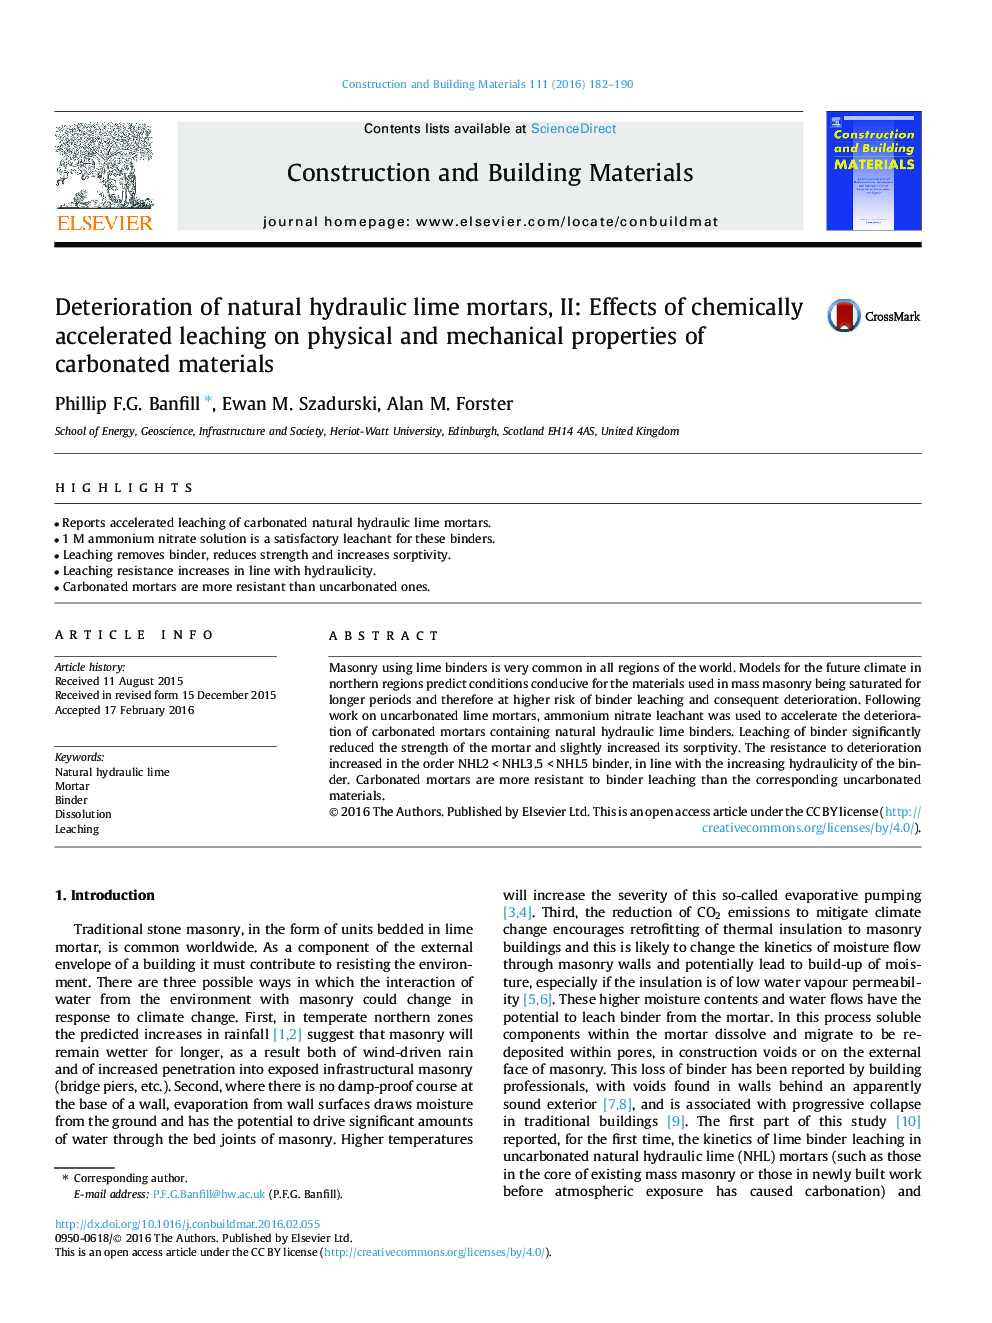 Deterioration of natural hydraulic lime mortars, II: Effects of chemically accelerated leaching on physical and mechanical properties of carbonated materials